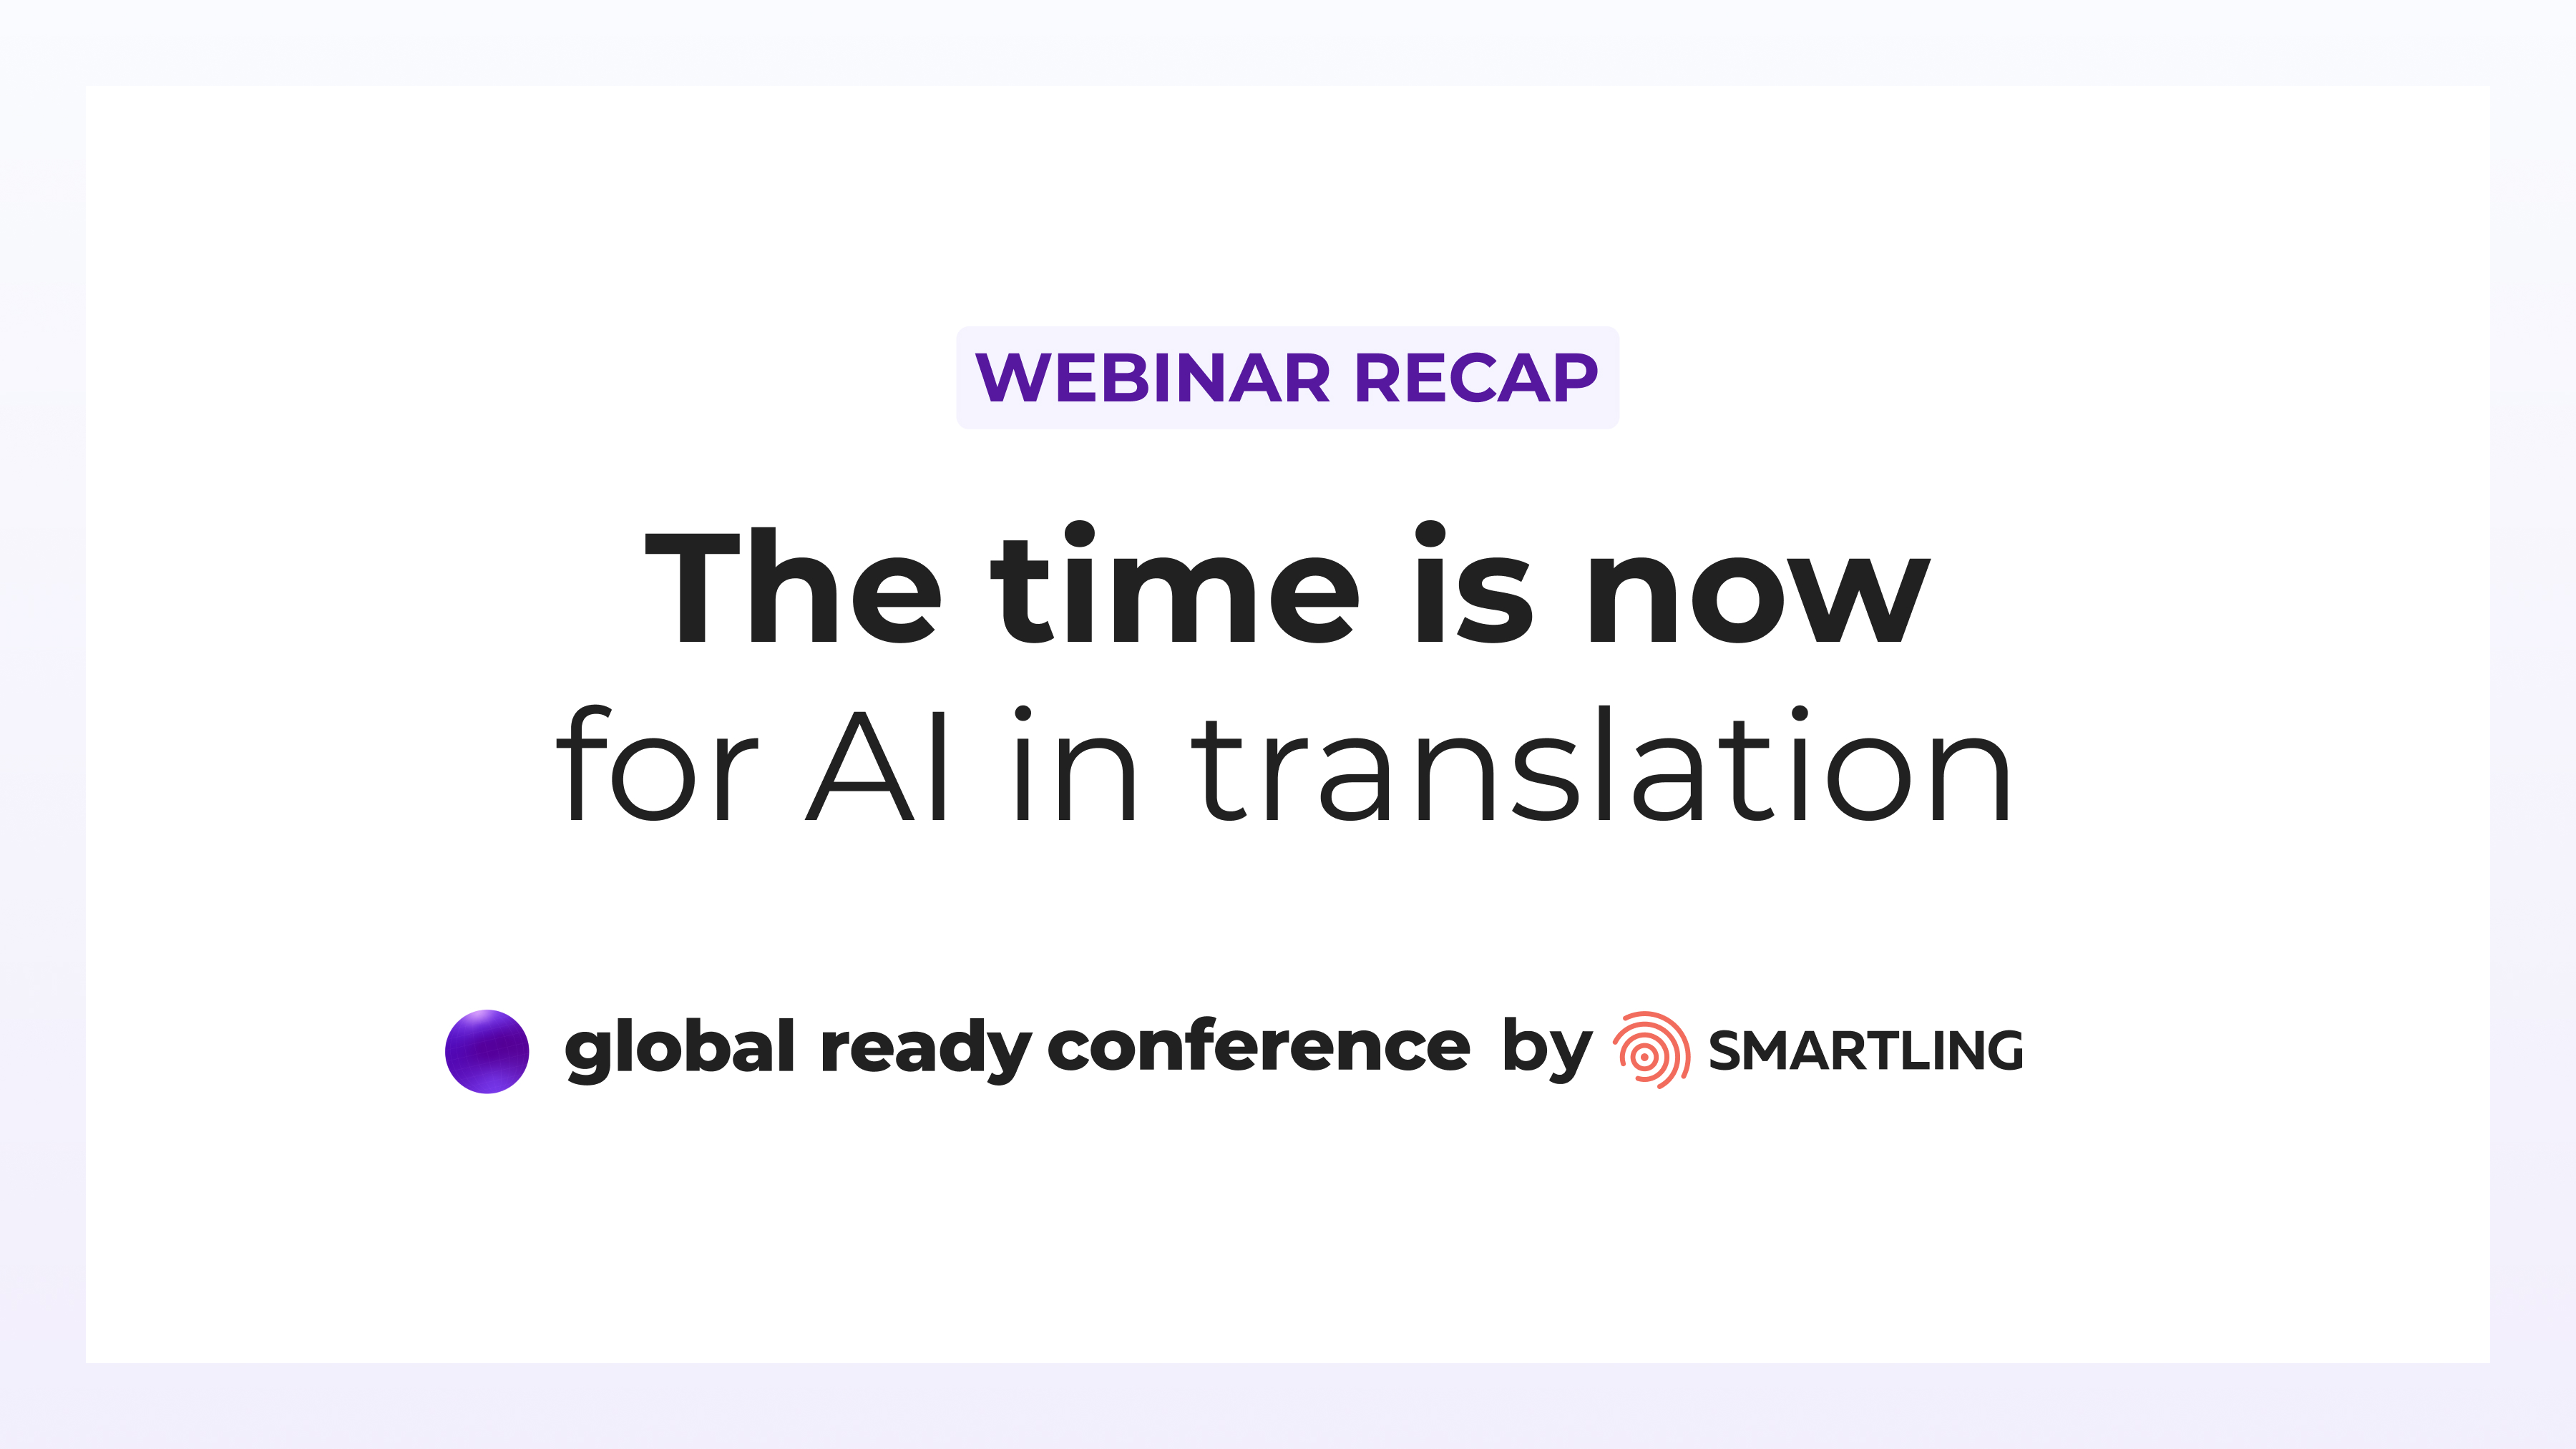 Business and localization professionals have been hearing about the potential of AI to transform the localization industry for the last few years. While there’s been a lot of excitement around what this will mean, how exactly can we best leverage this technology? 